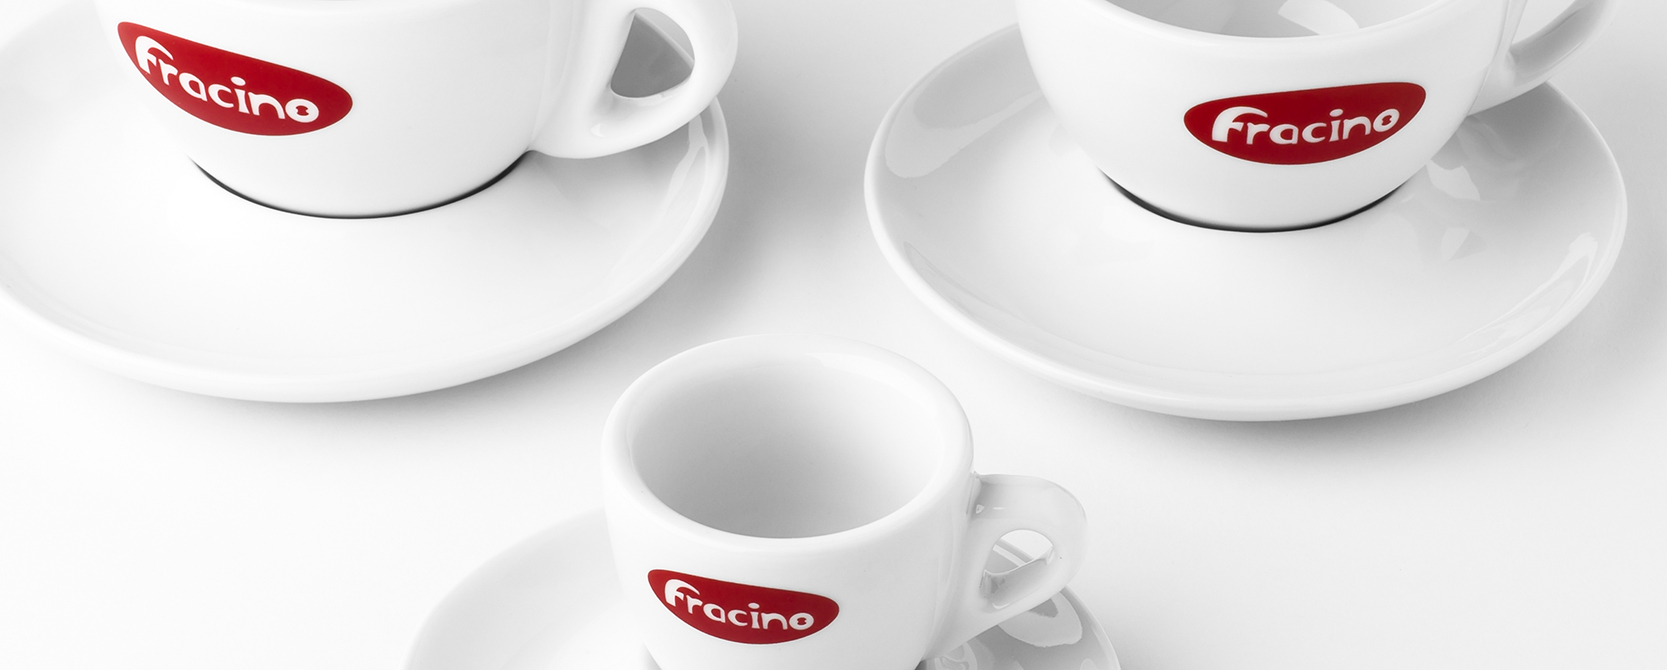 Cups & Saucers Commercial Cappuccino Coffee & Espresso Machine